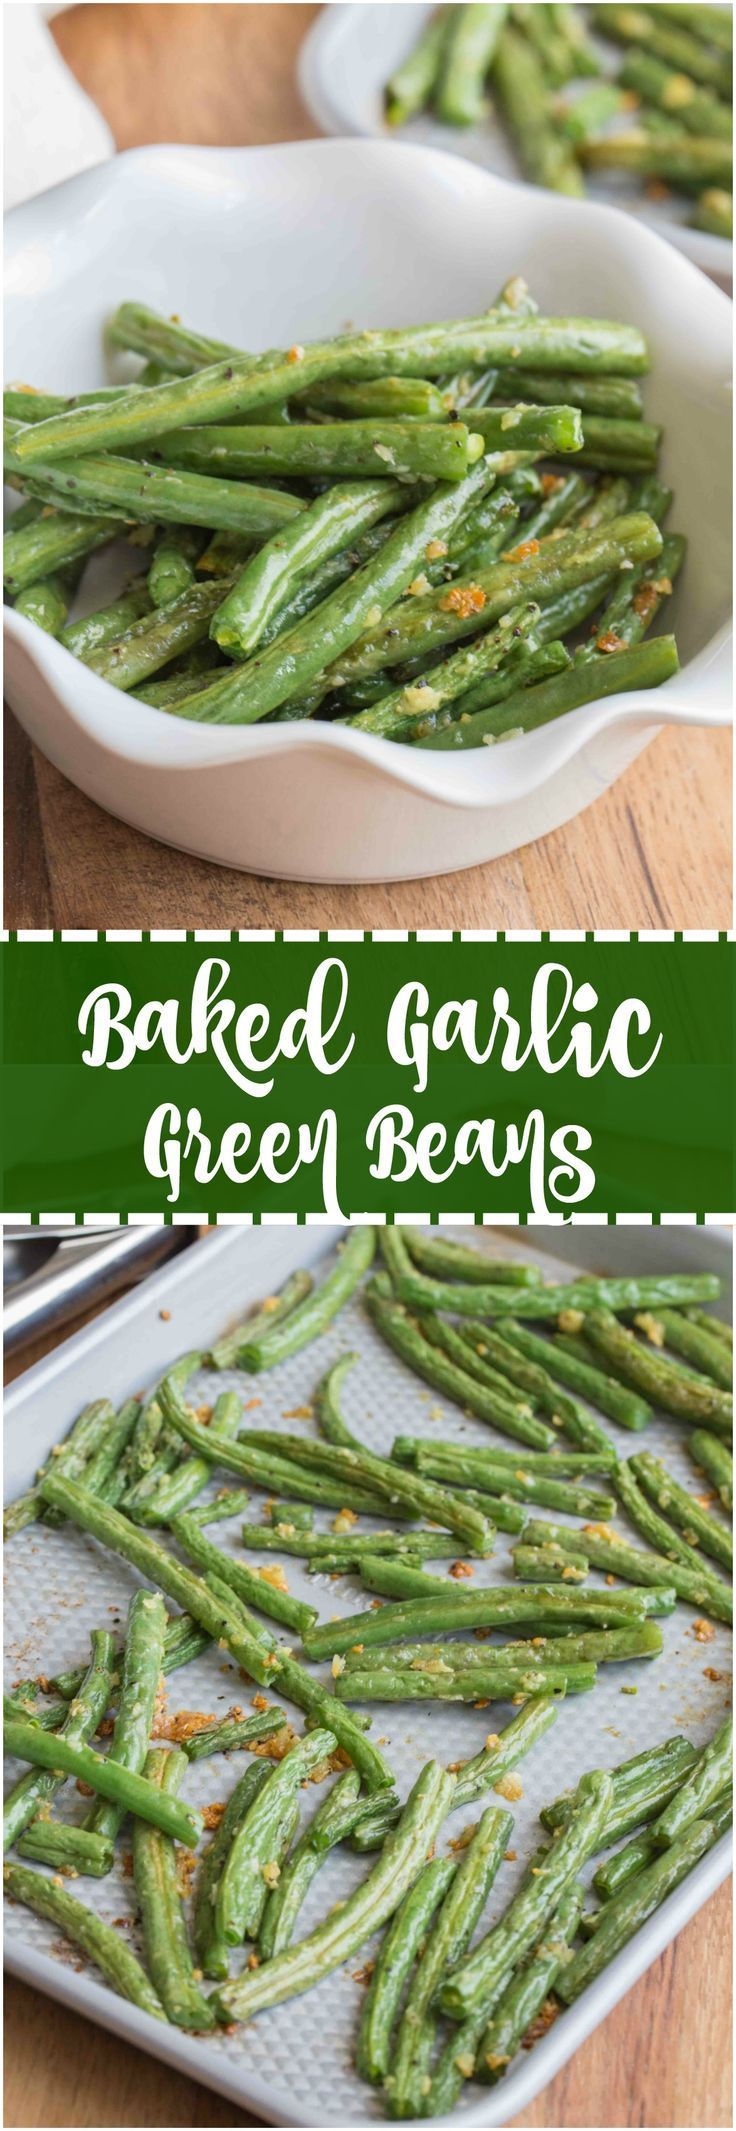 Baked Garlic Green Beans are a simple and delicious side dish that will compliment